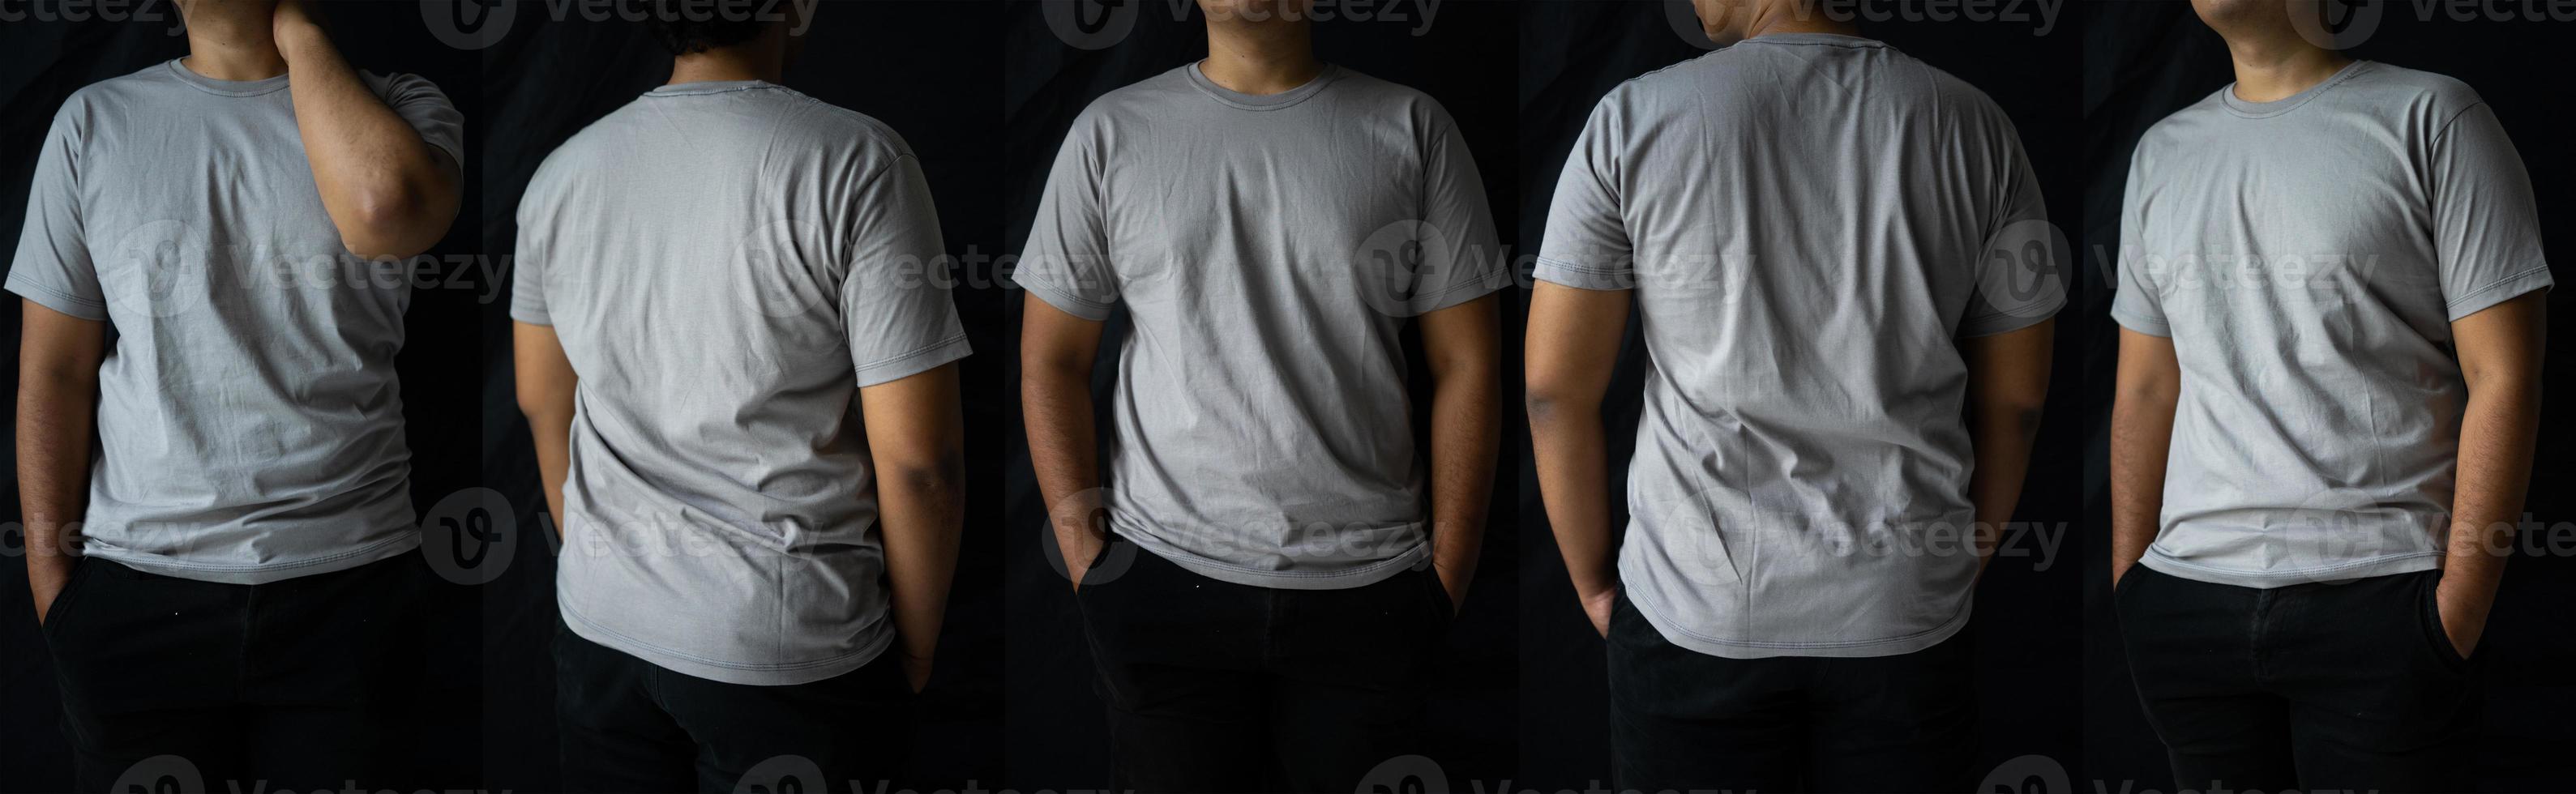 stylish men wear plain T-shirts for mockups. blank t-shirt design displays from the back and front sides. photo